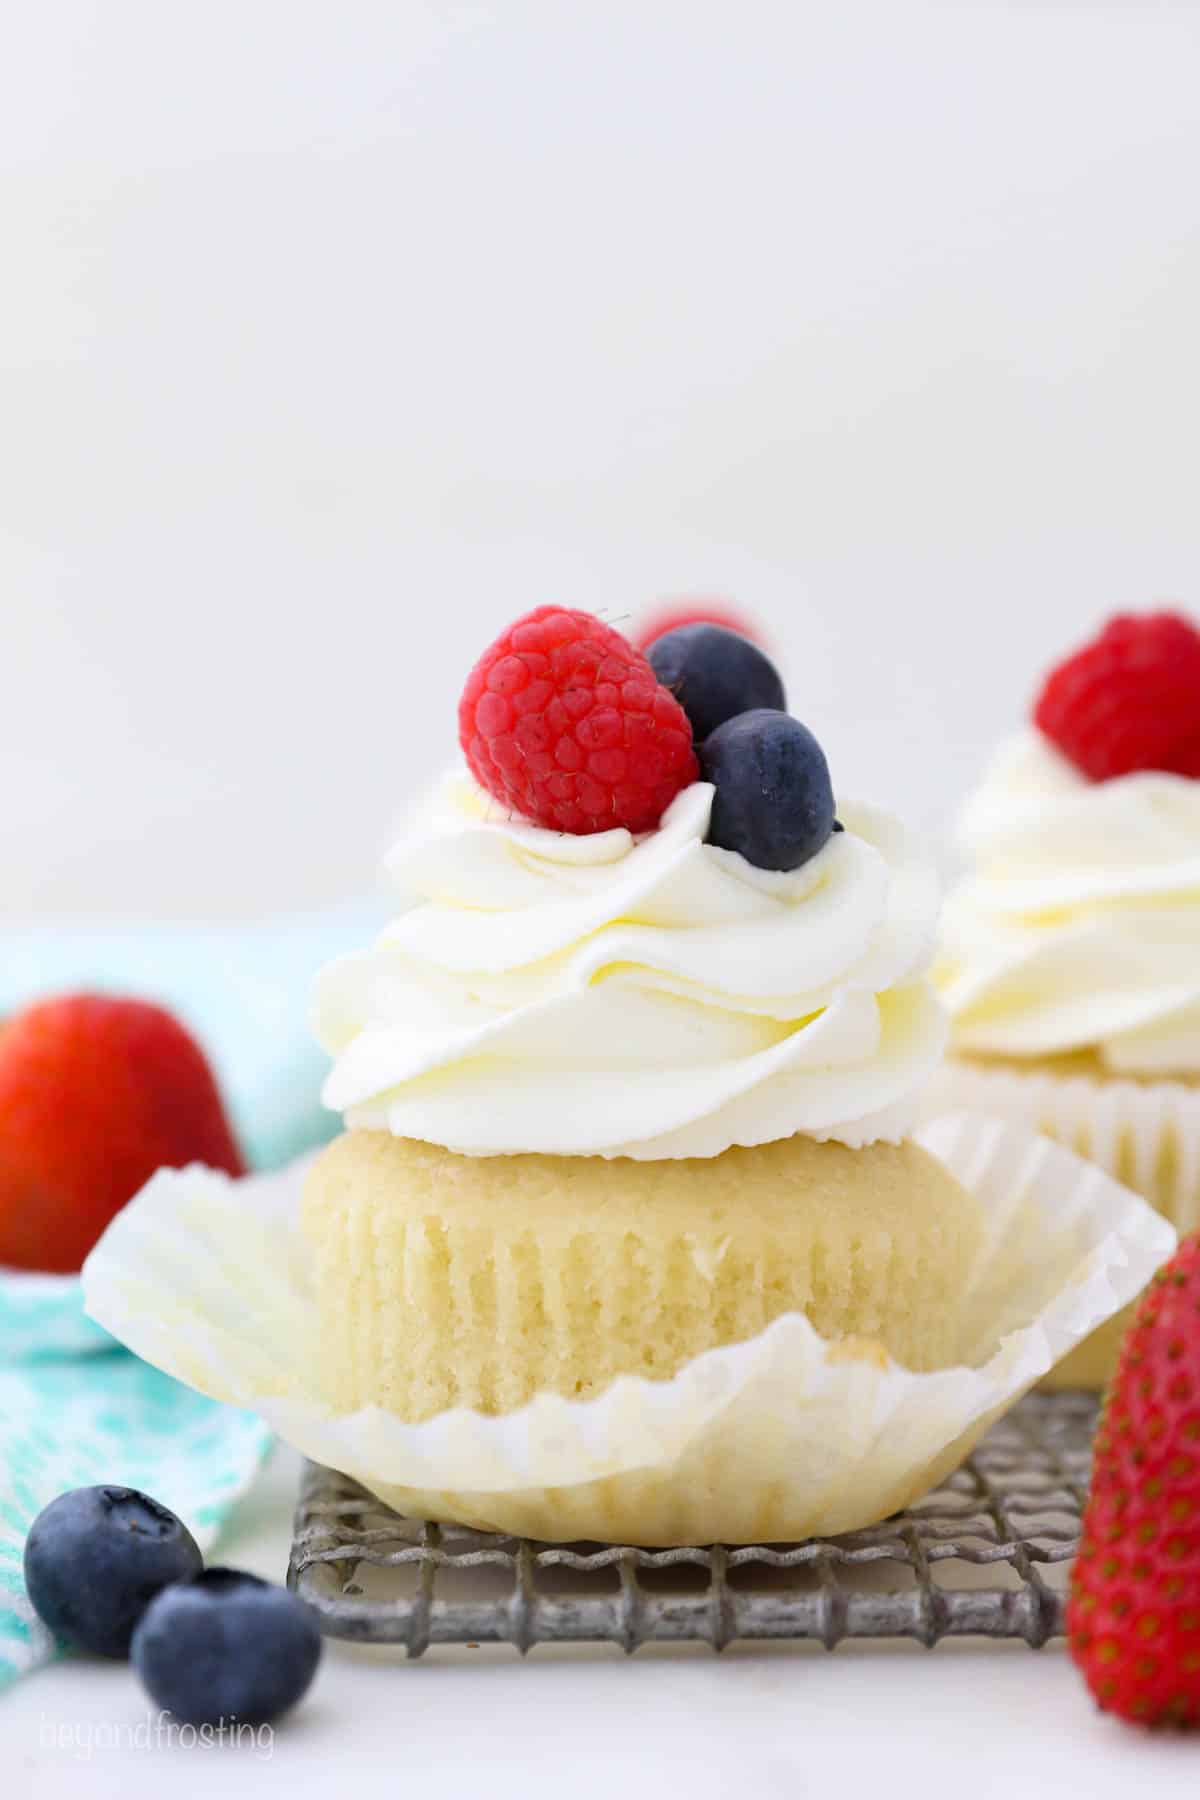 A cupcake with the wrapped pulled down is topped with berries